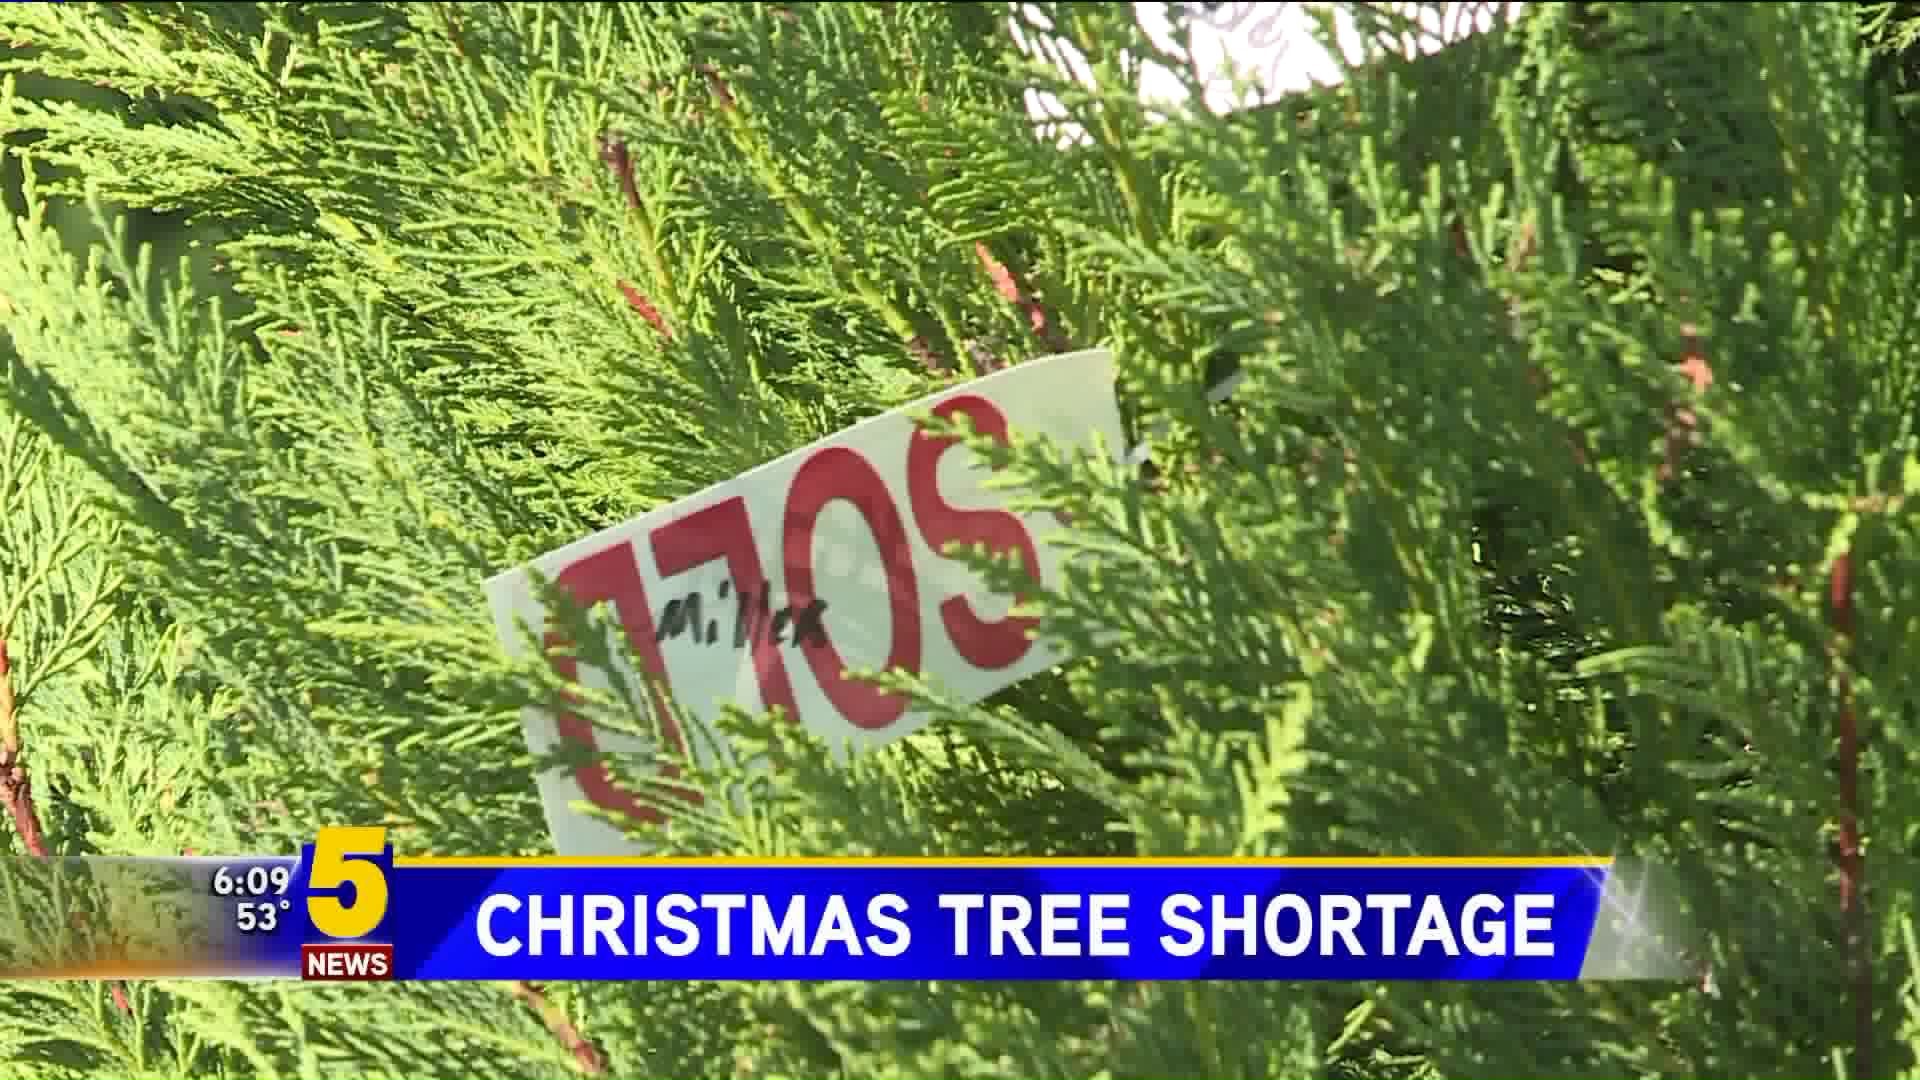 National Christmas Tree Shortage Impacts Some Local Tree Farms